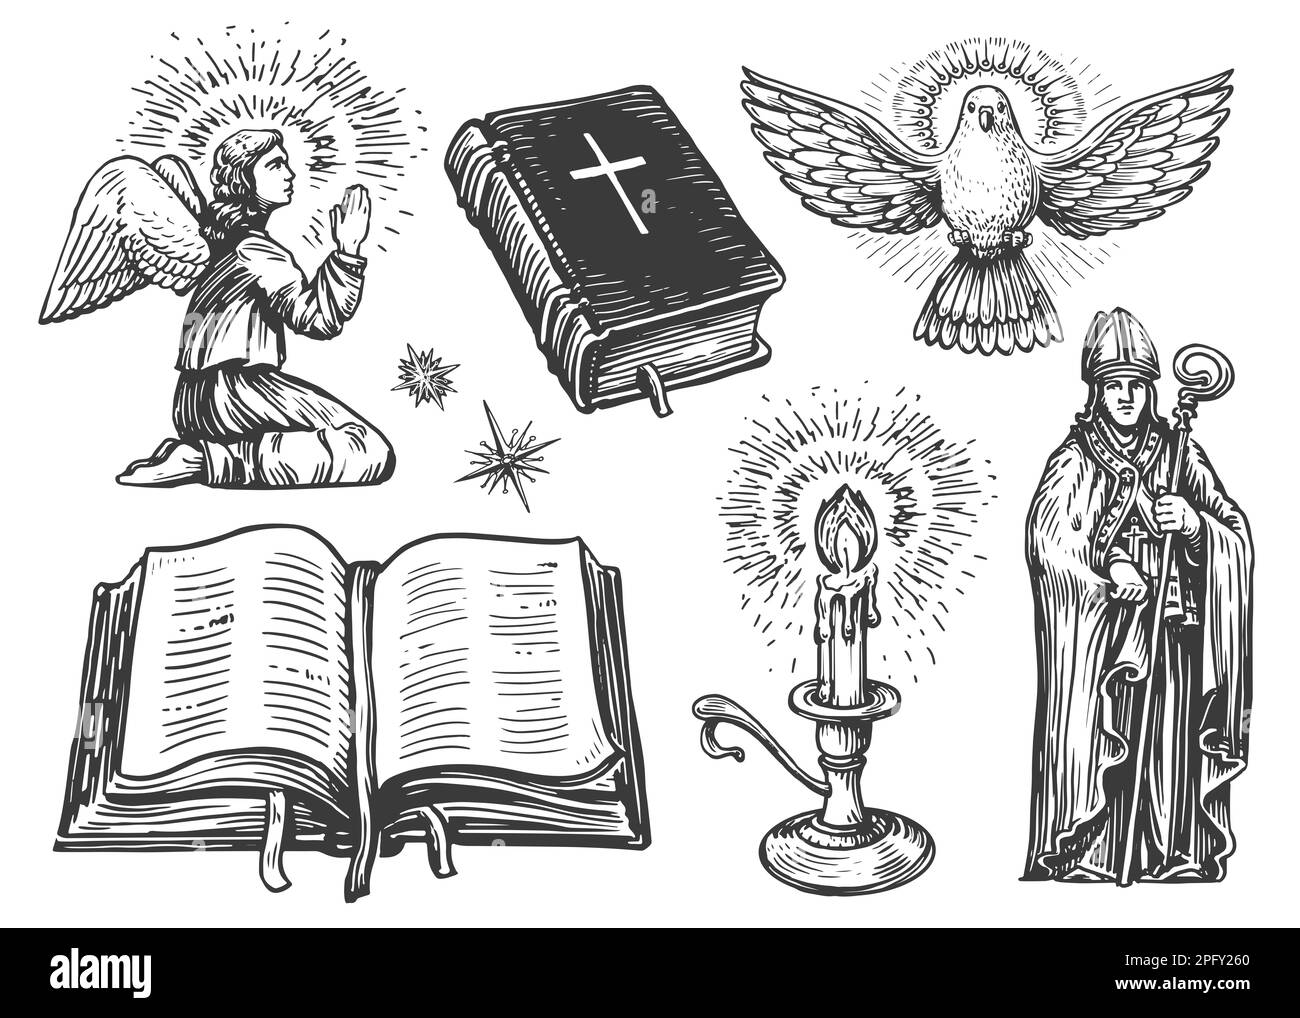 Praying angel with wings, Holy Bible book, Lit candle, Flying dove messenger, Bishop. Religion illustration set Stock Photo